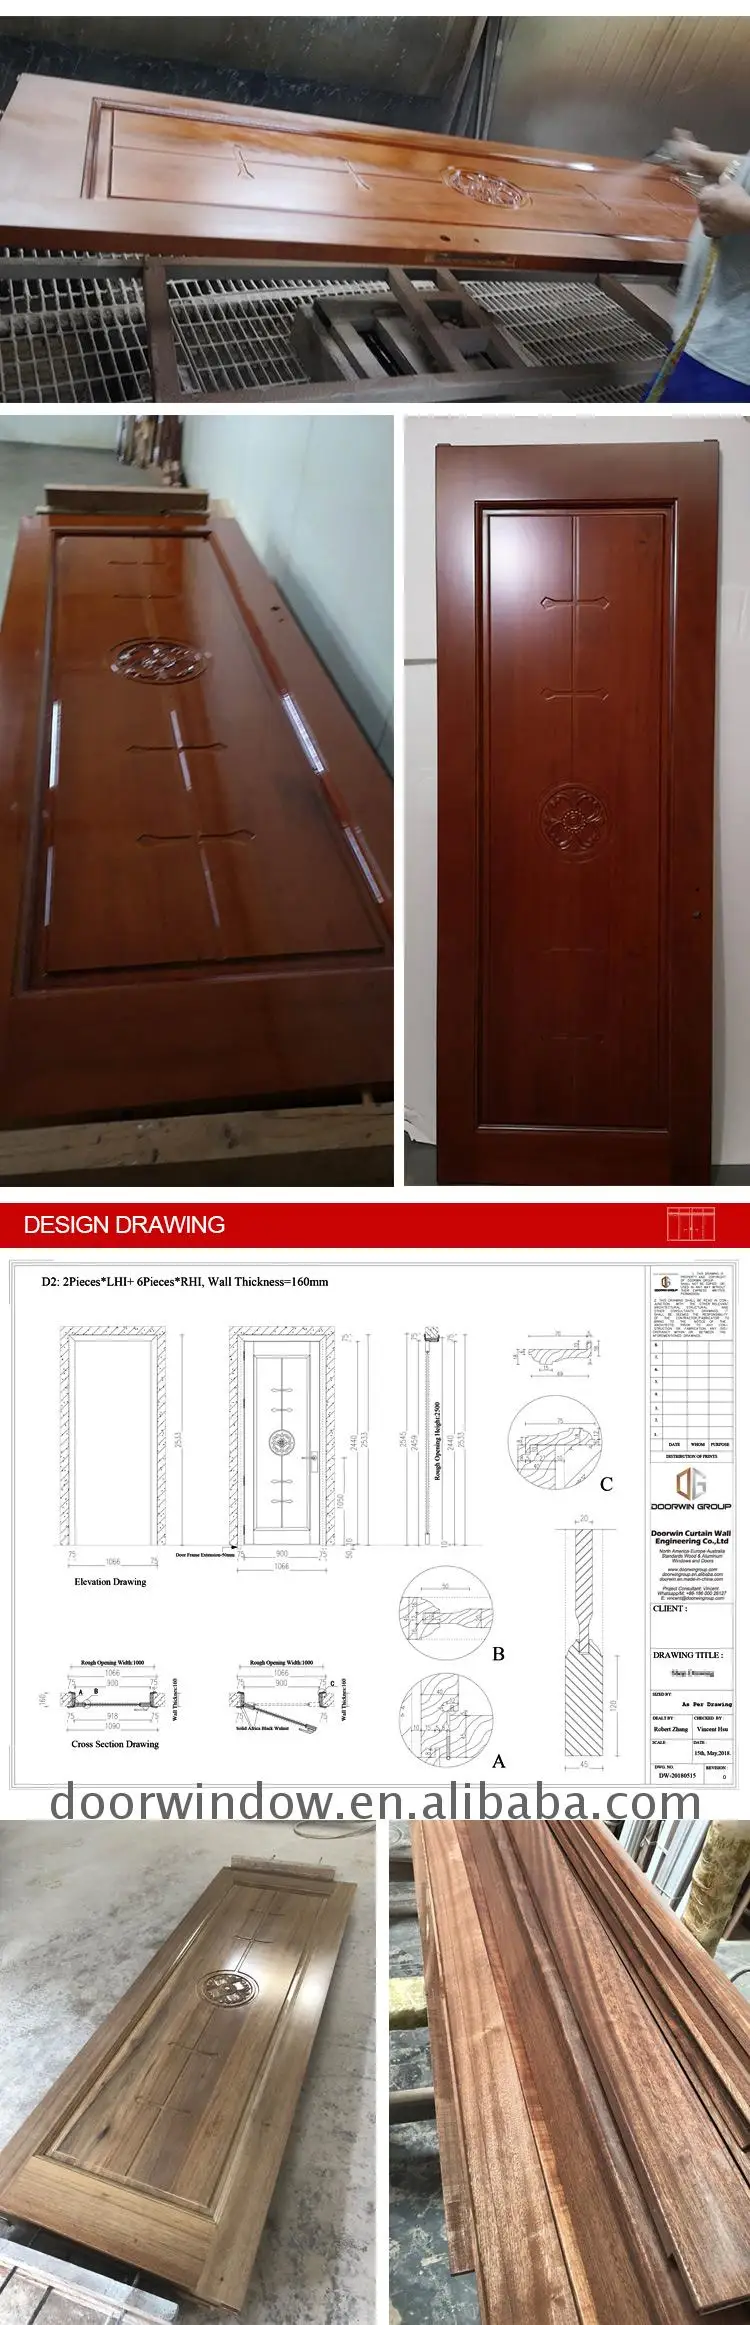 2019 new hand carved wood doors frosted etched interior engineered oak internal